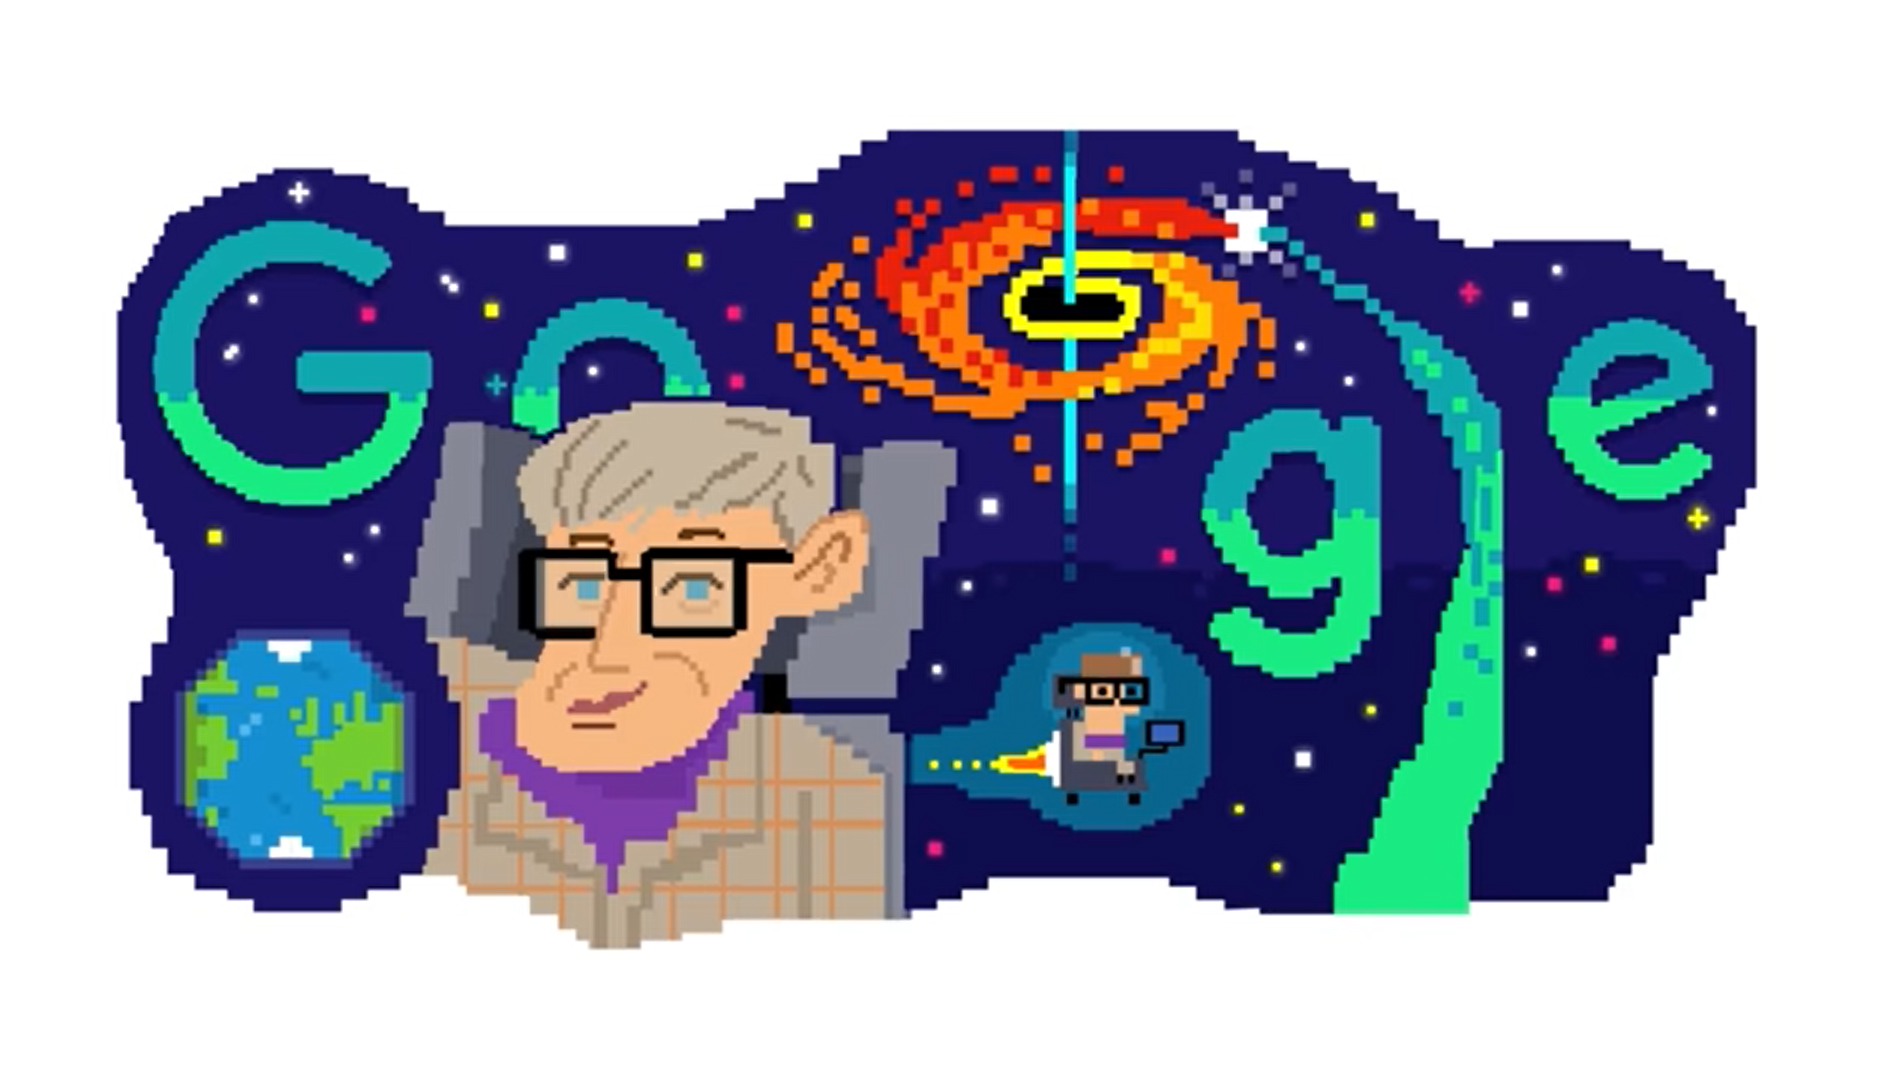 Google Doodle celebrates the life of cosmologist Stephen Hawking for his 80th birthday thumbnail